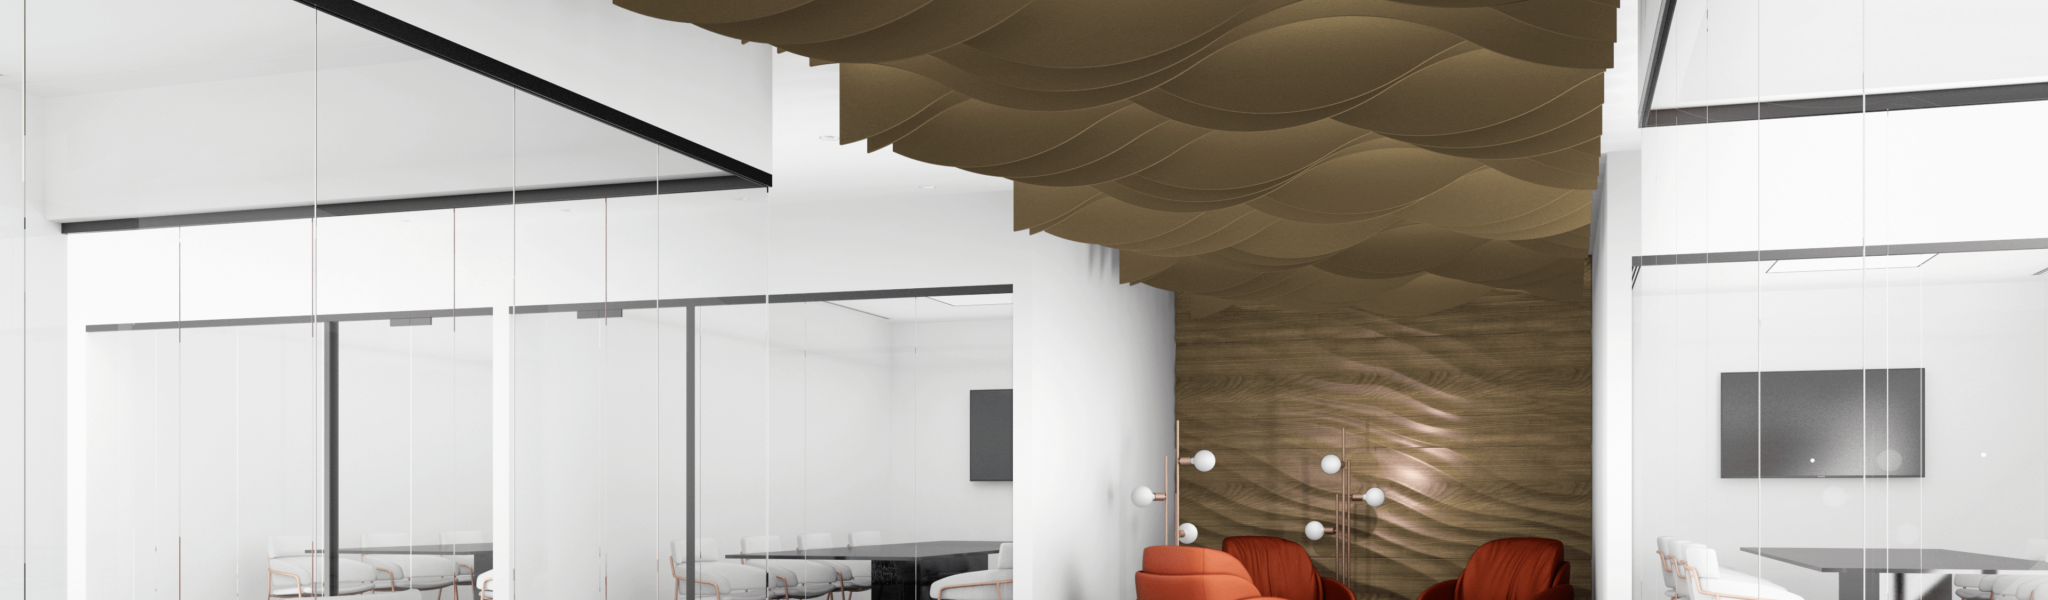 Londe acoustic ceiling baffle in huddle spaces